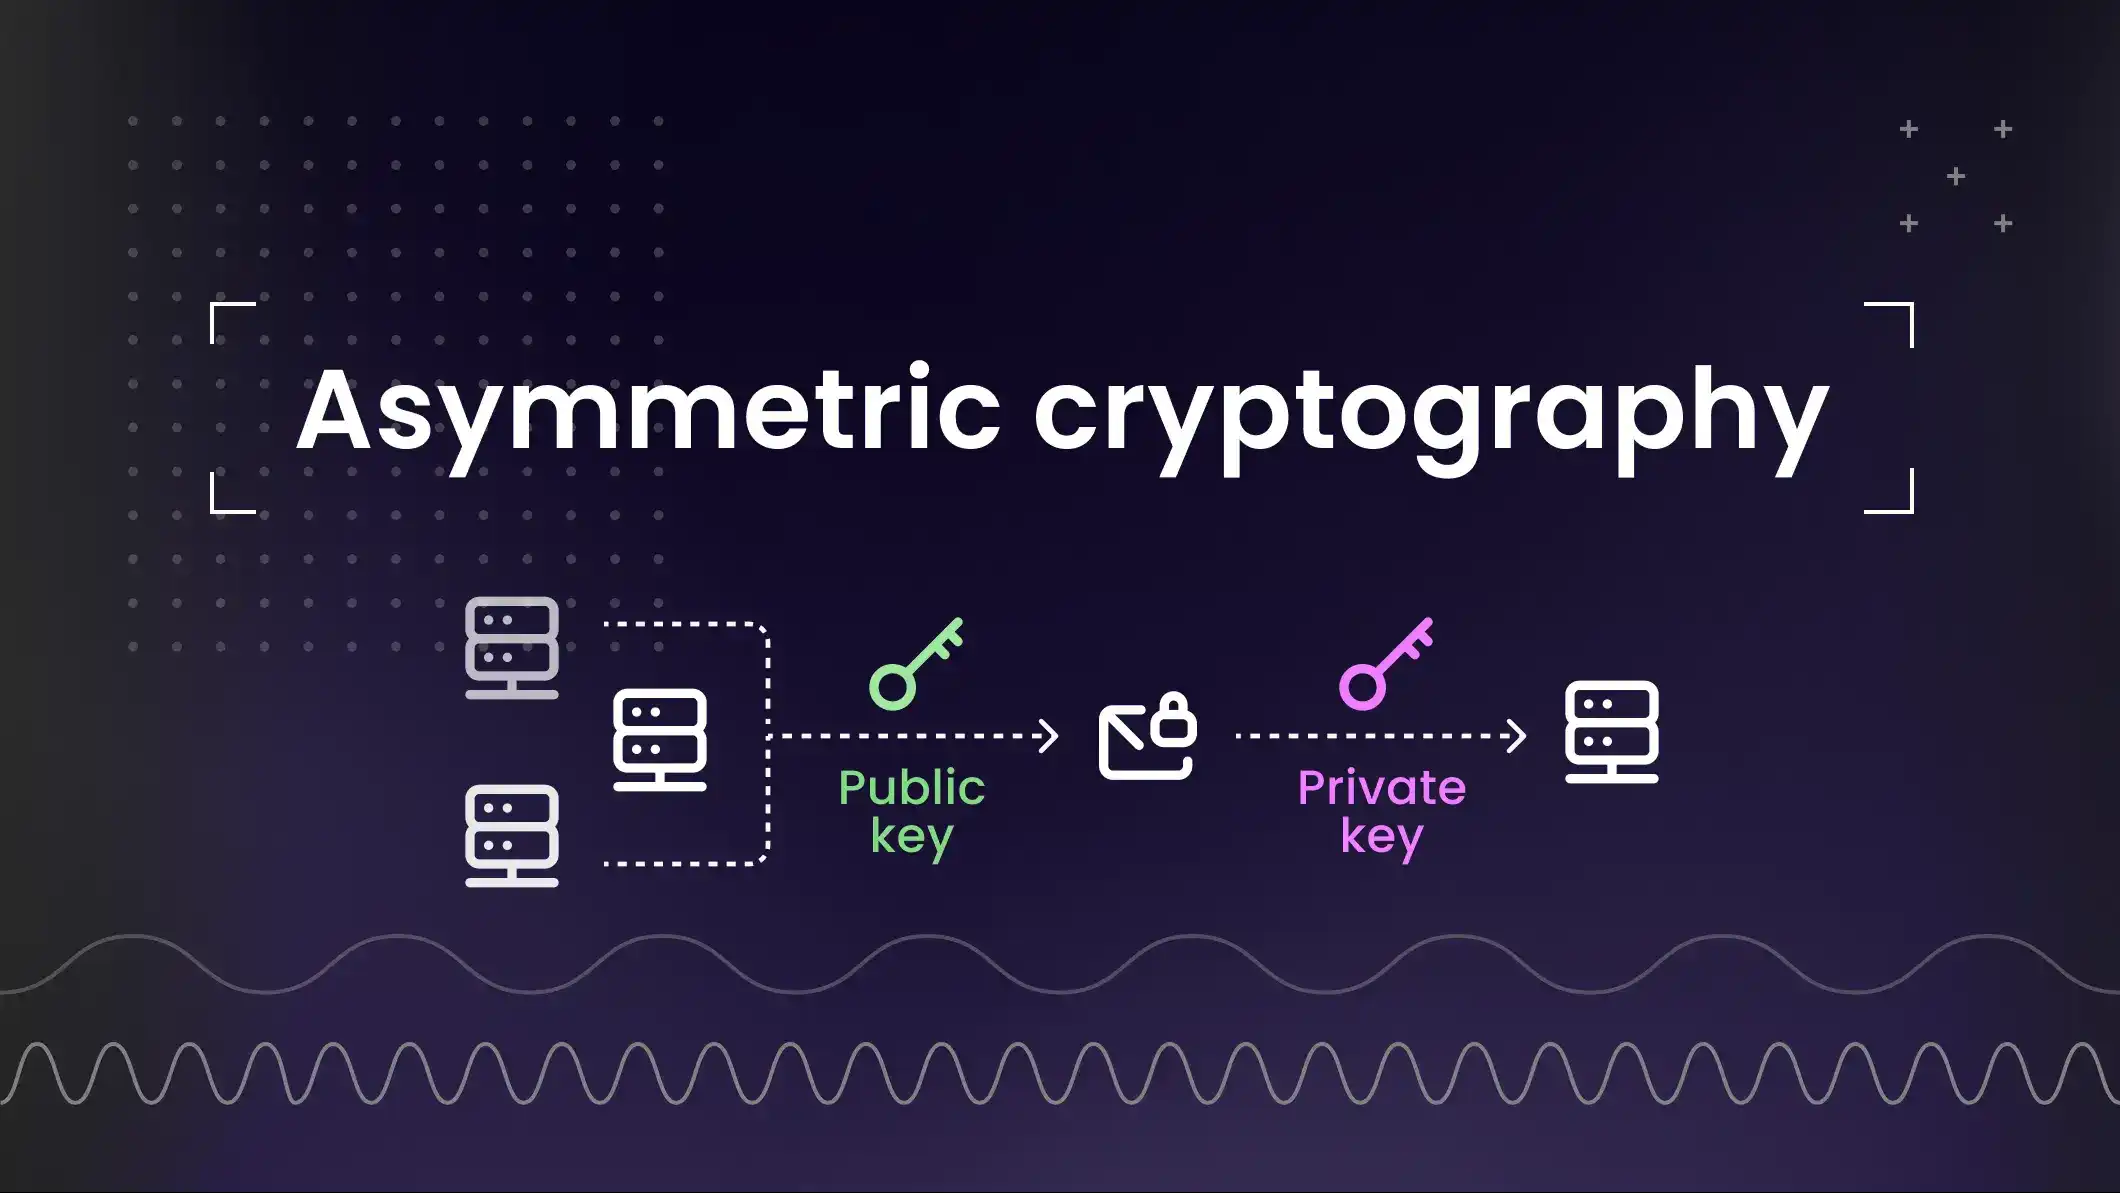 Public key, private key and asymmetric cryptography